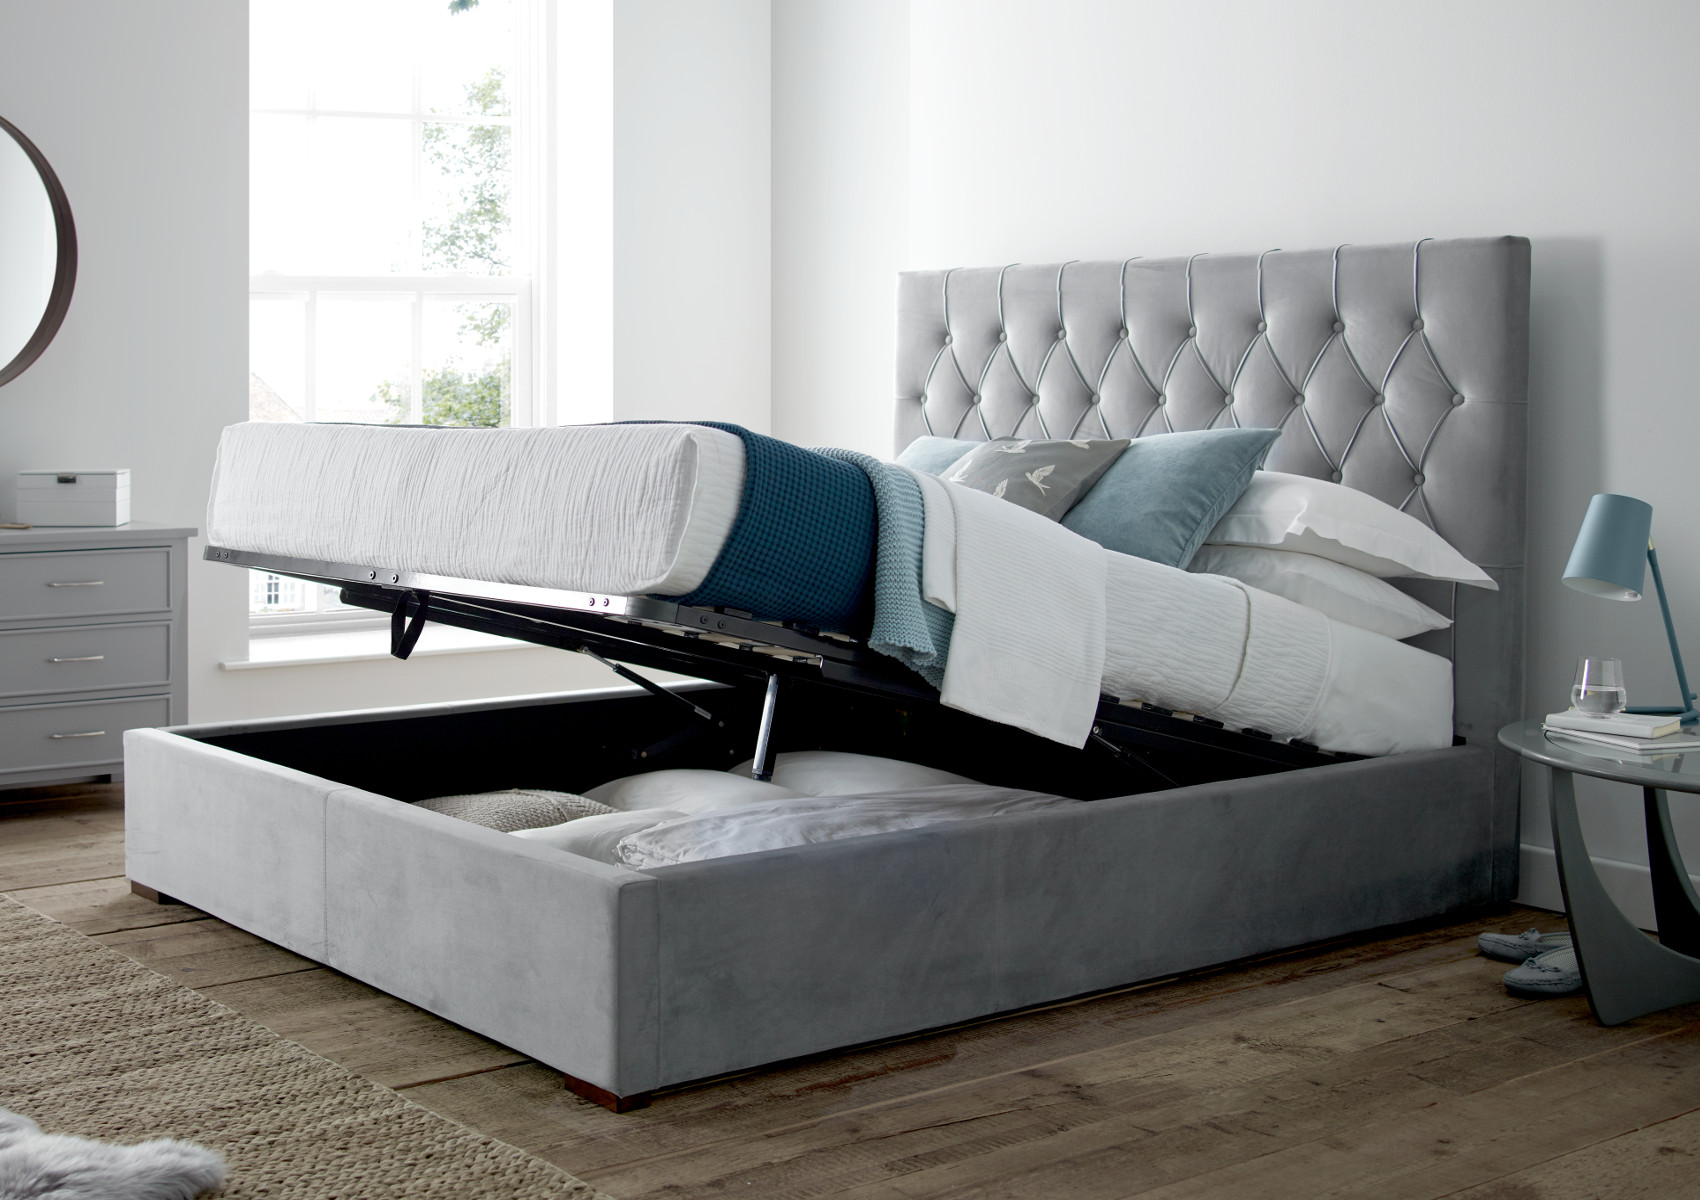 View Savoy Grey Upholstered Ottoman Storage Bed Frame Only Time4Sleep information